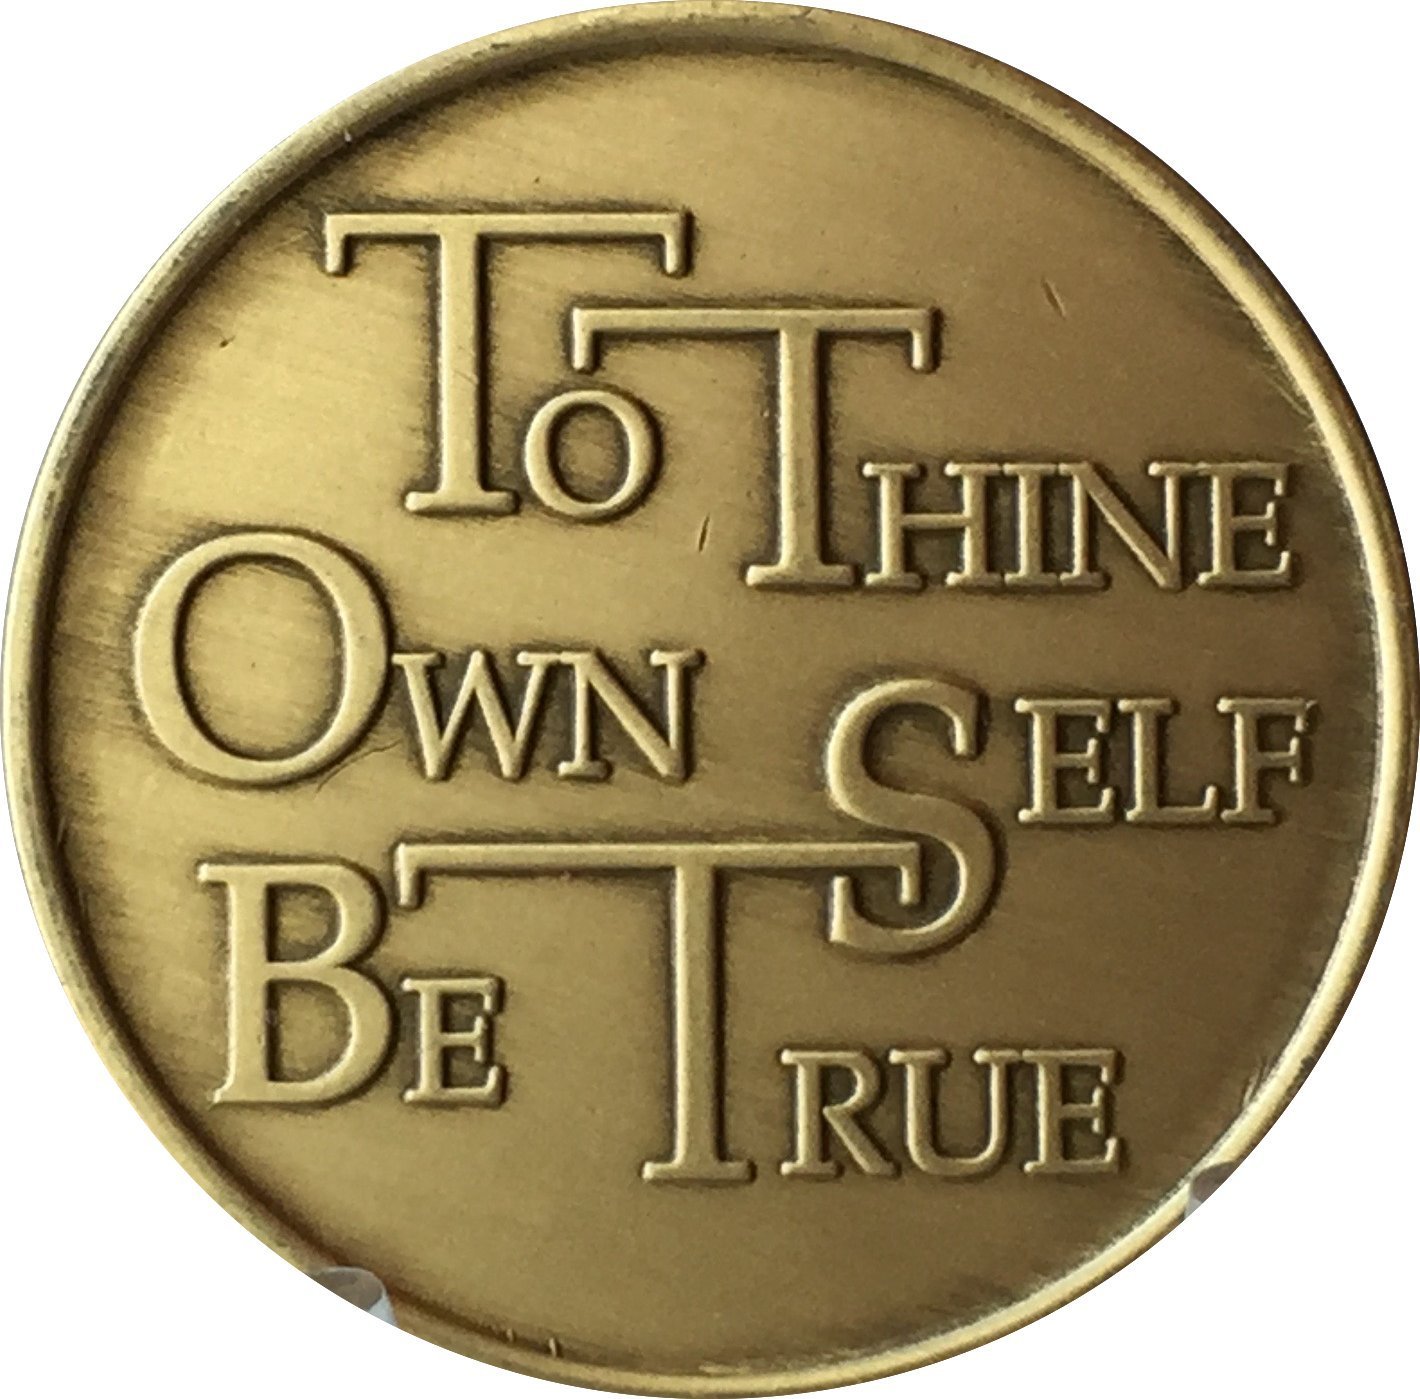 Wendells Bulk Lot of 25 To Thine Own Self Be True AA Medallions Serenity Pray...